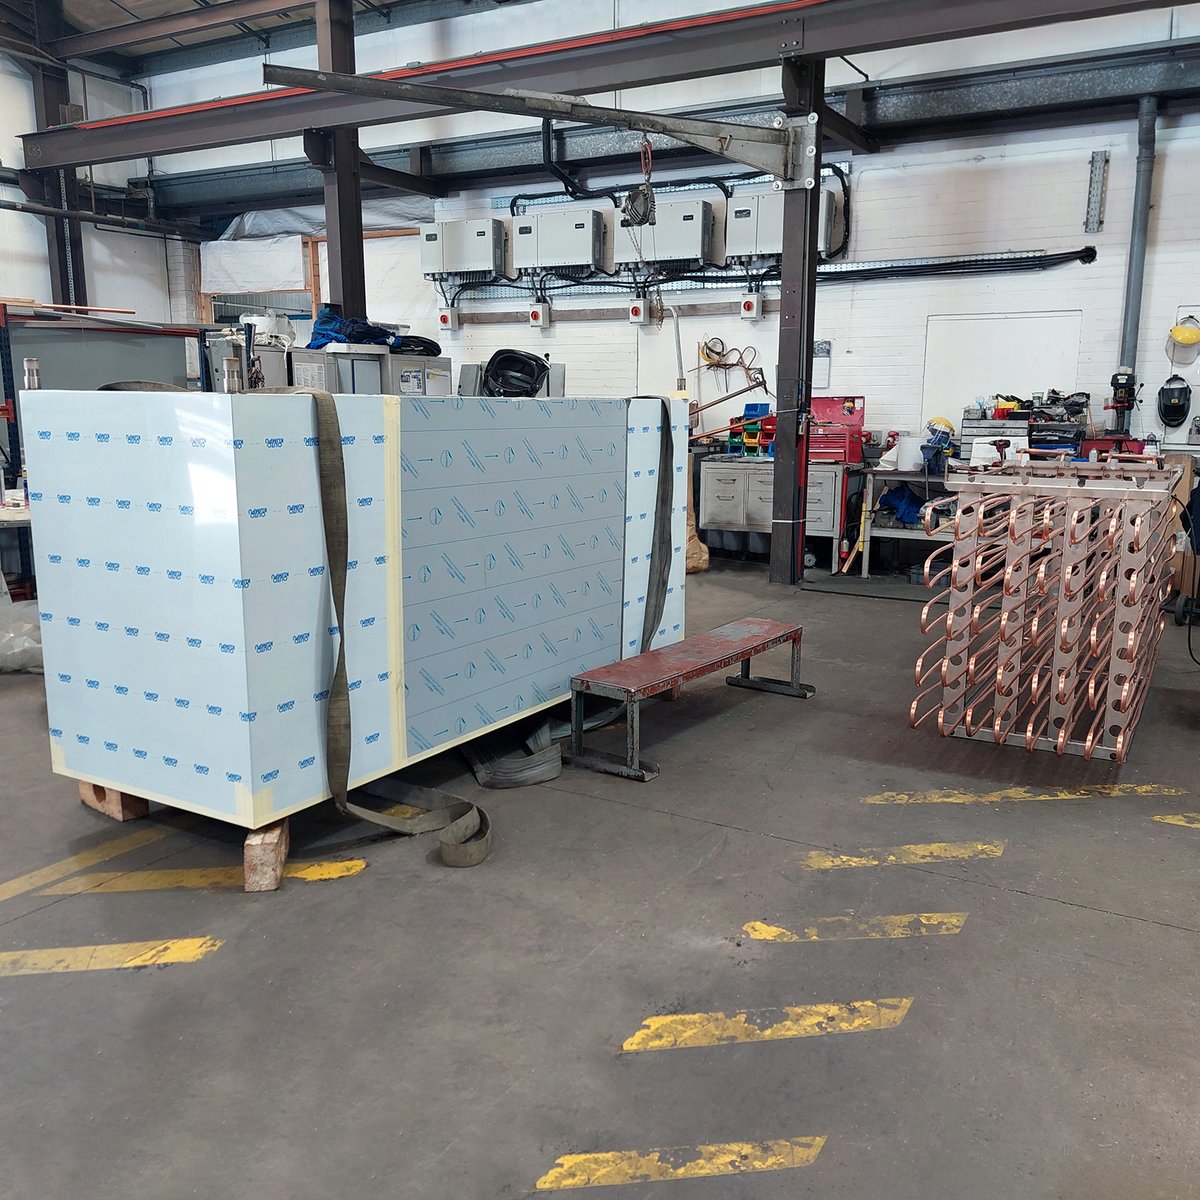 Our KOOL-PAK ice builders are in production!

These are used within the dairy industry to provide ice water for additional milk pre-cooling, helping improve milk quality.

#manufacturemonday #icebuilder #koolpak #milking #manufacturing #manufacturer #fabdec #darikool #ukmfg